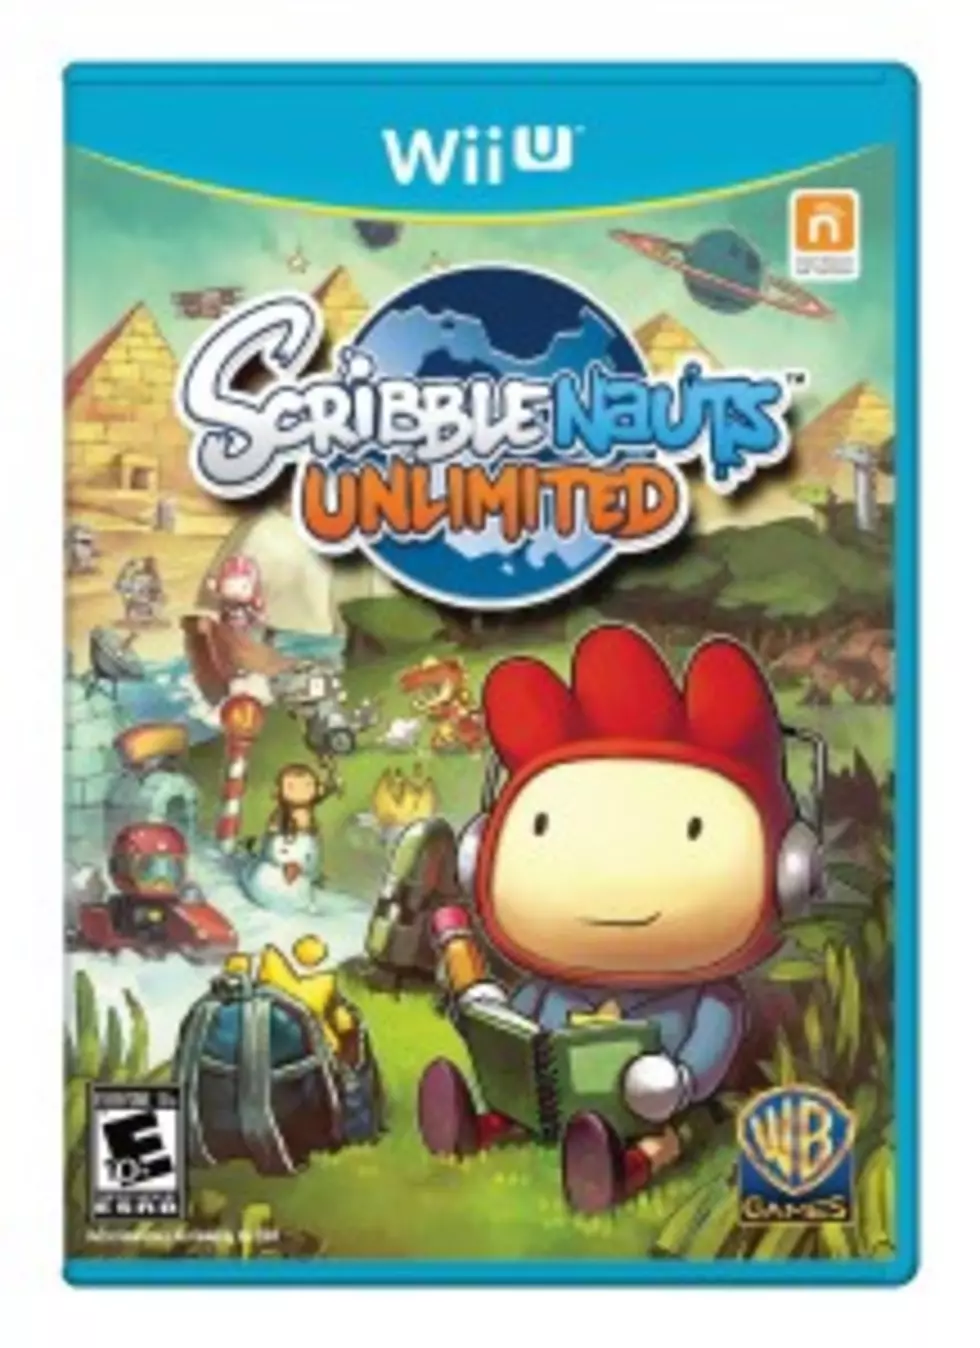 The Rob Reviews Scribblenauts Unlimited